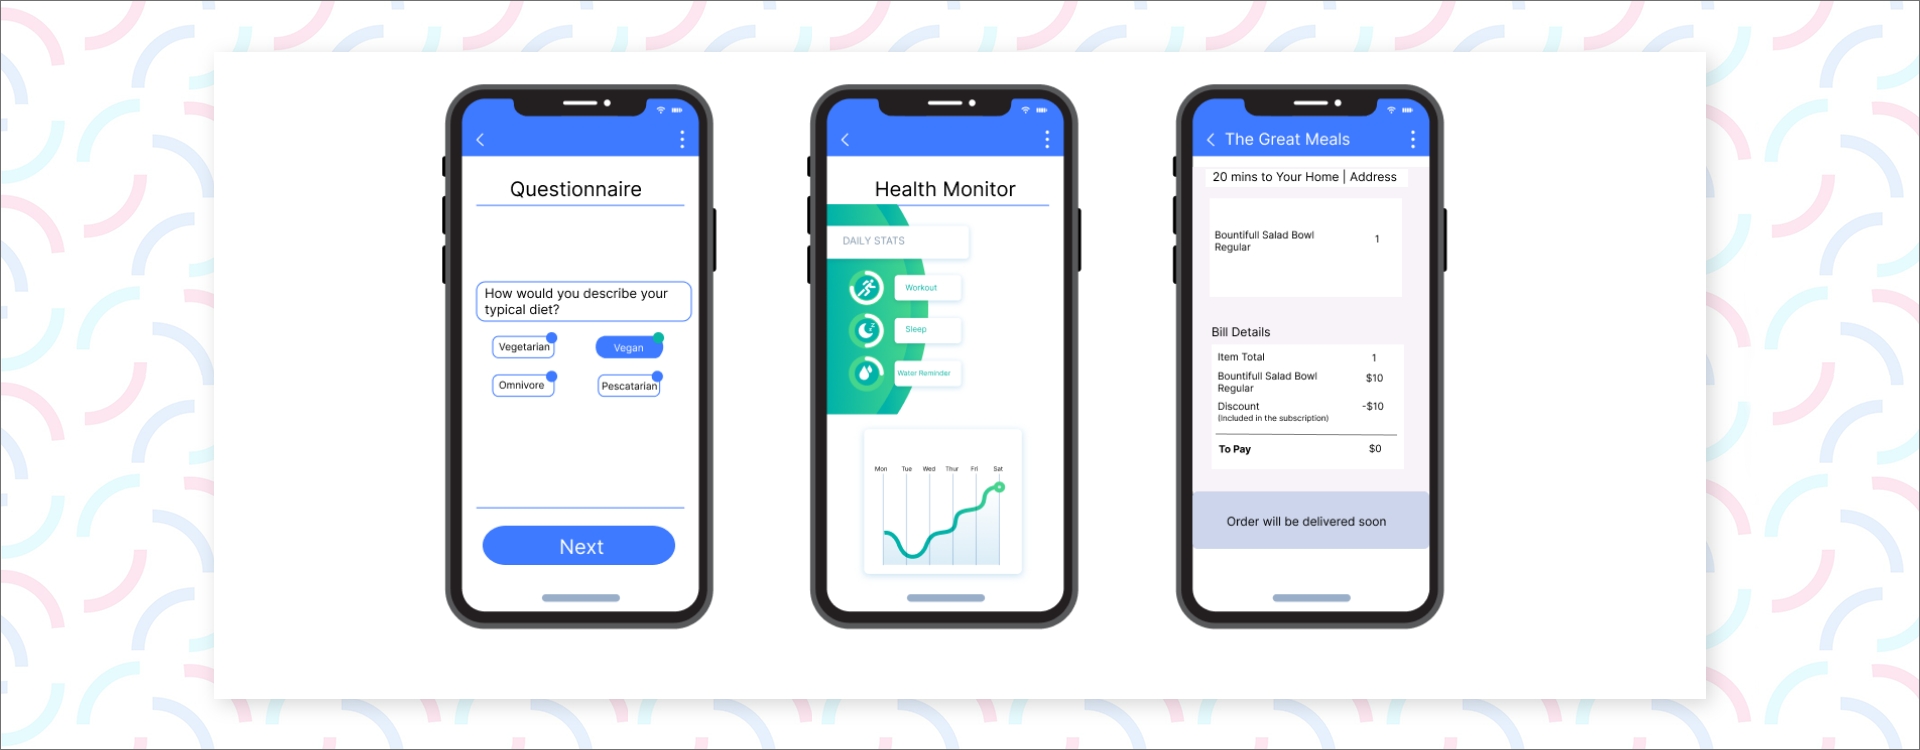 Visual representation of the AI-backed health platform's user interfaces and functionalities.